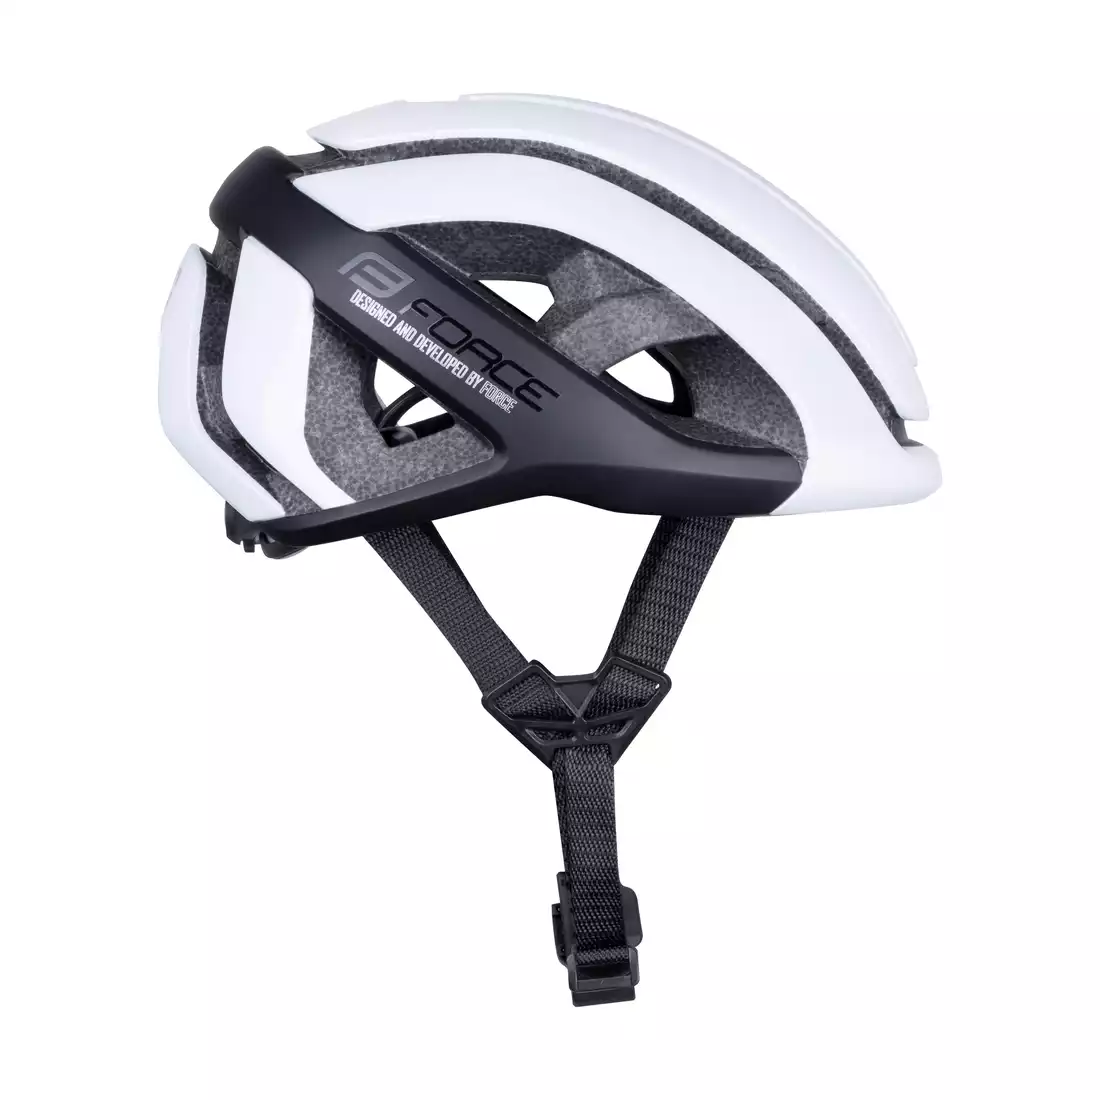 FORCE NEO MIPS Bicycle helmet, White and black